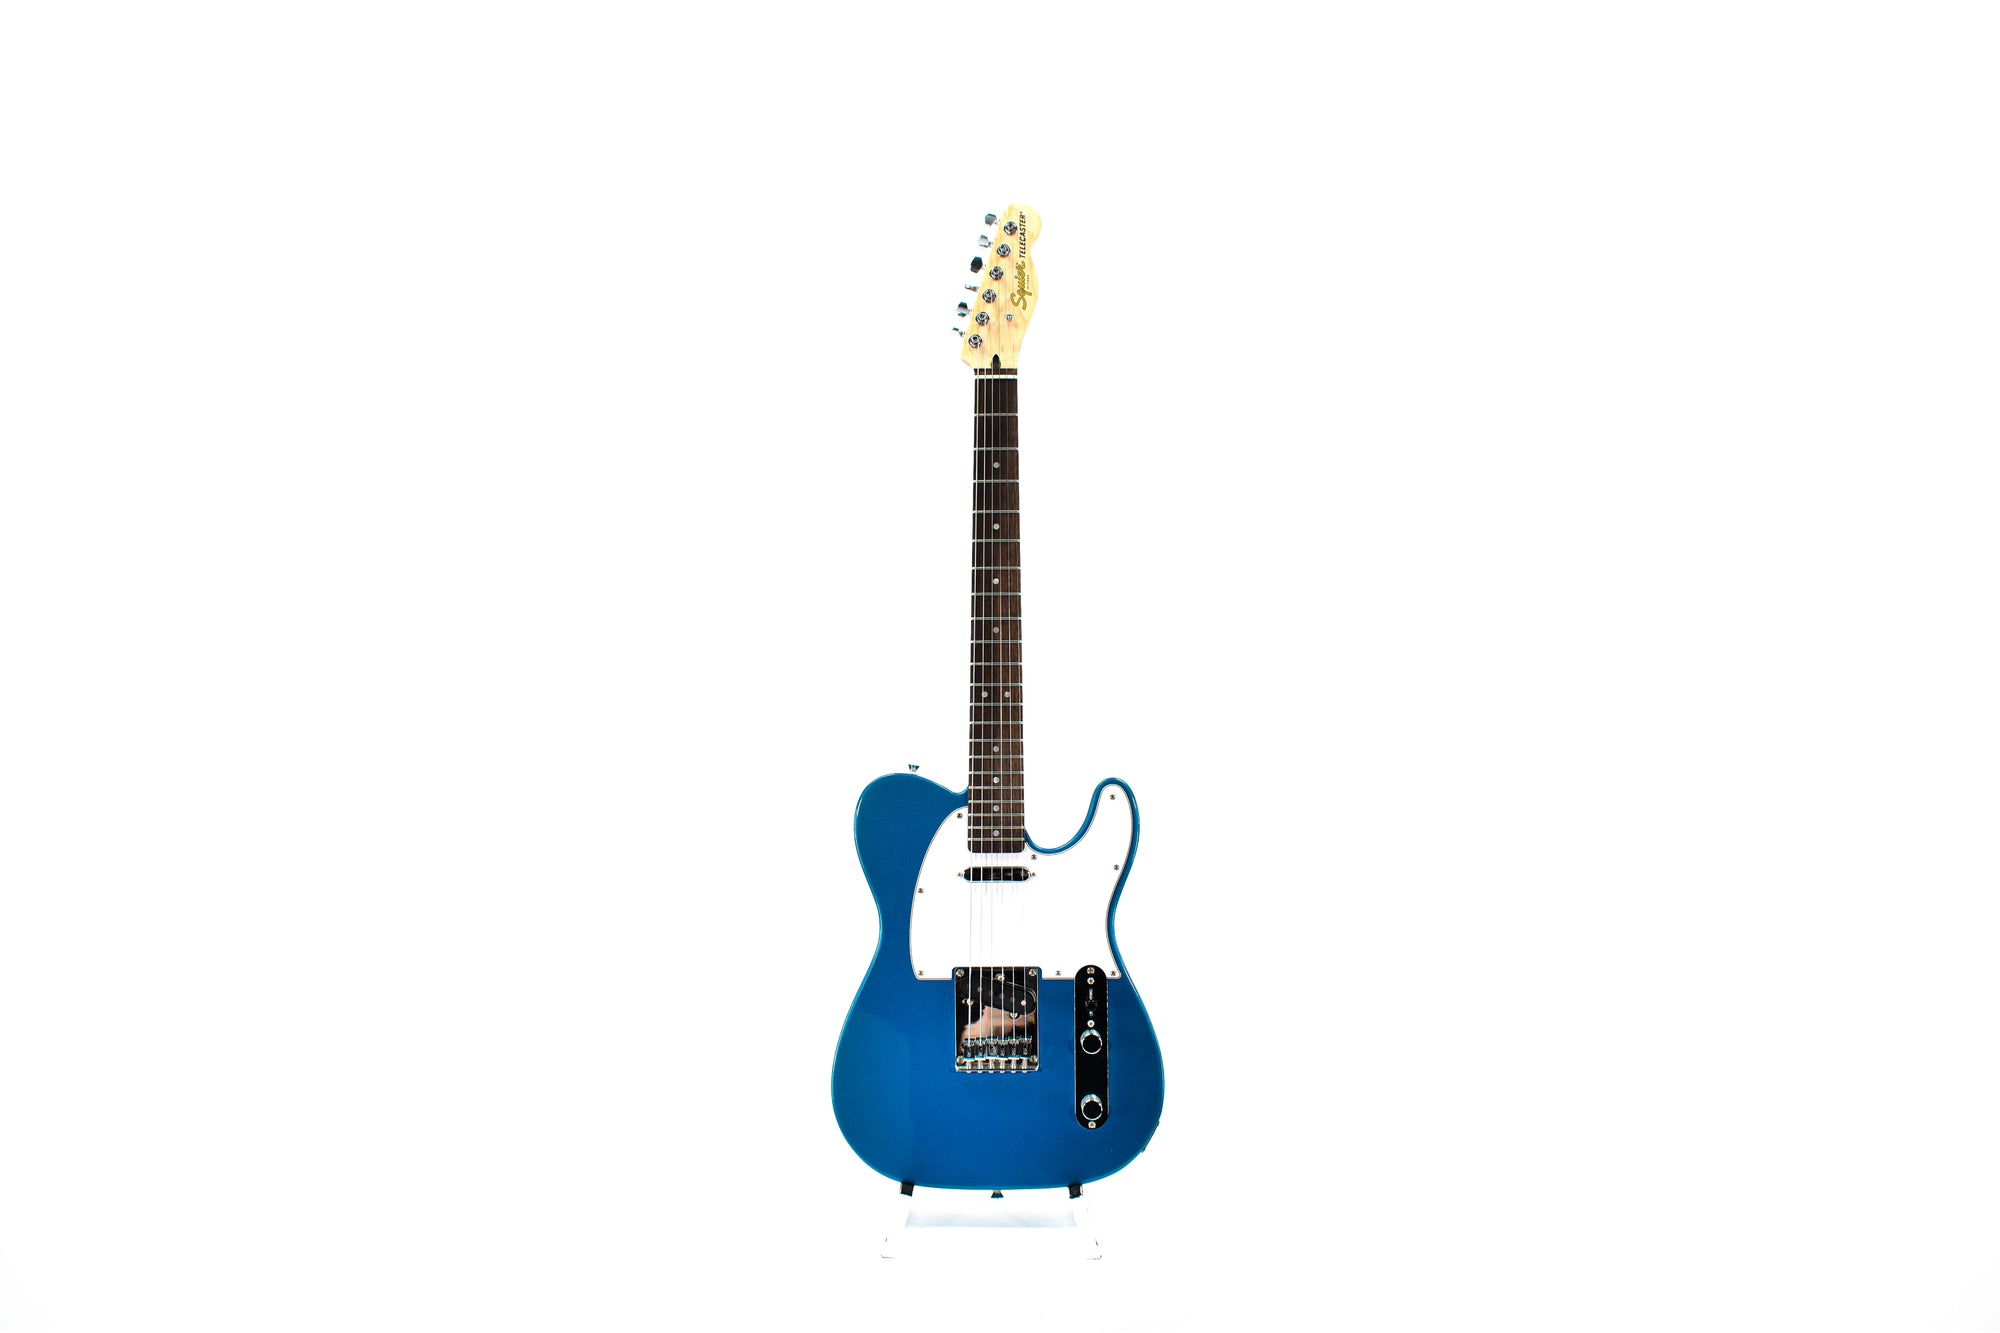 Squier Affinity Placid Blue Telecaster Occasion